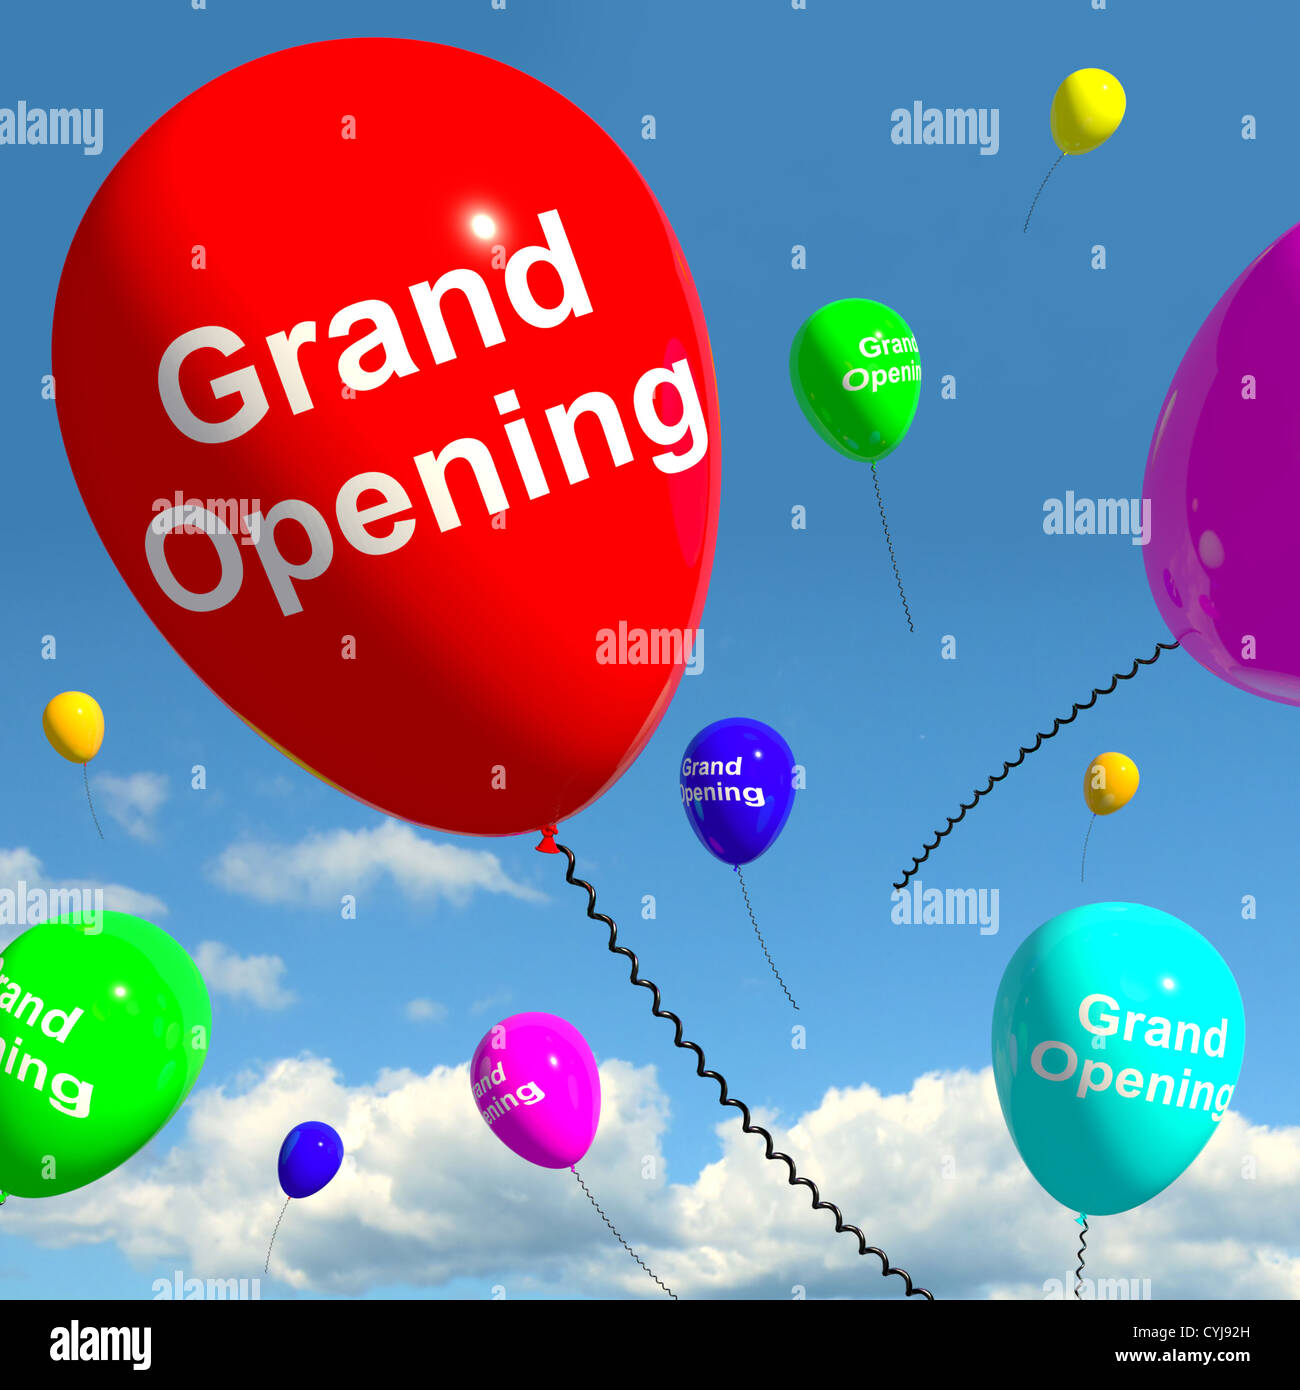 Grand Opening Balloons Shows New Store Launch Stock Photo